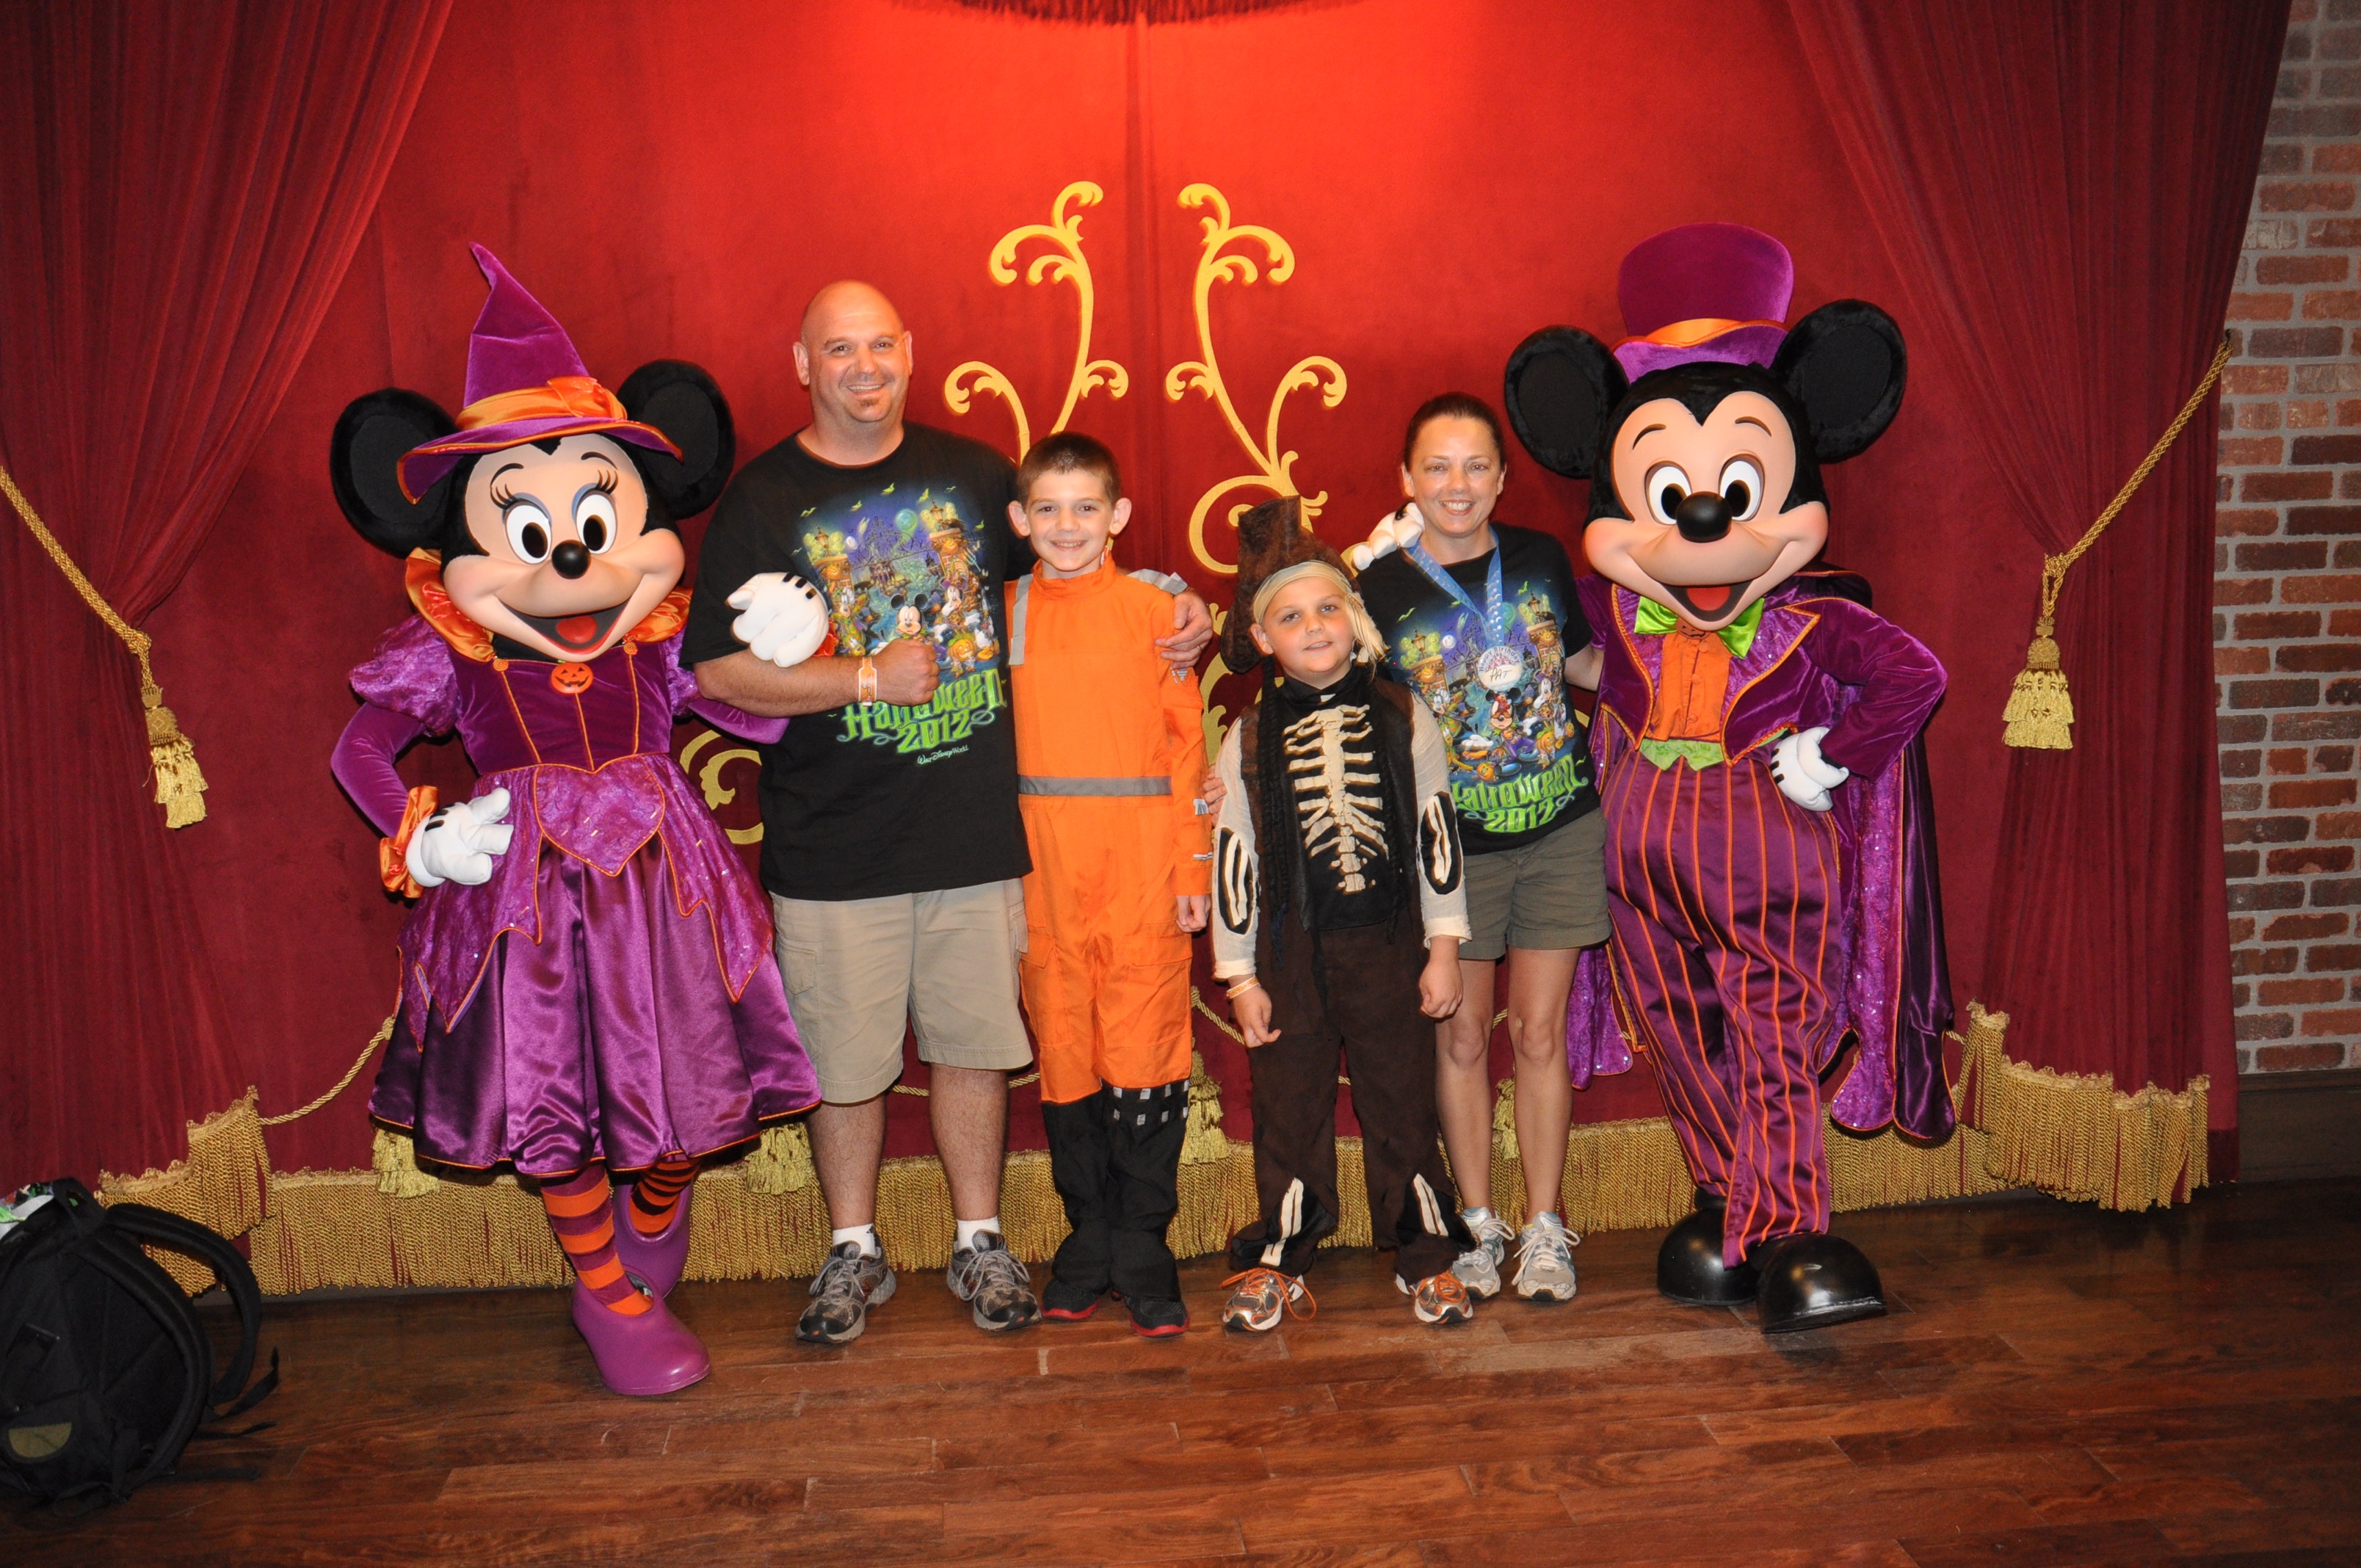 Join the Divas/Devos for a Halloween Photo Contest and a Chance to Win a Disney Gift Card!